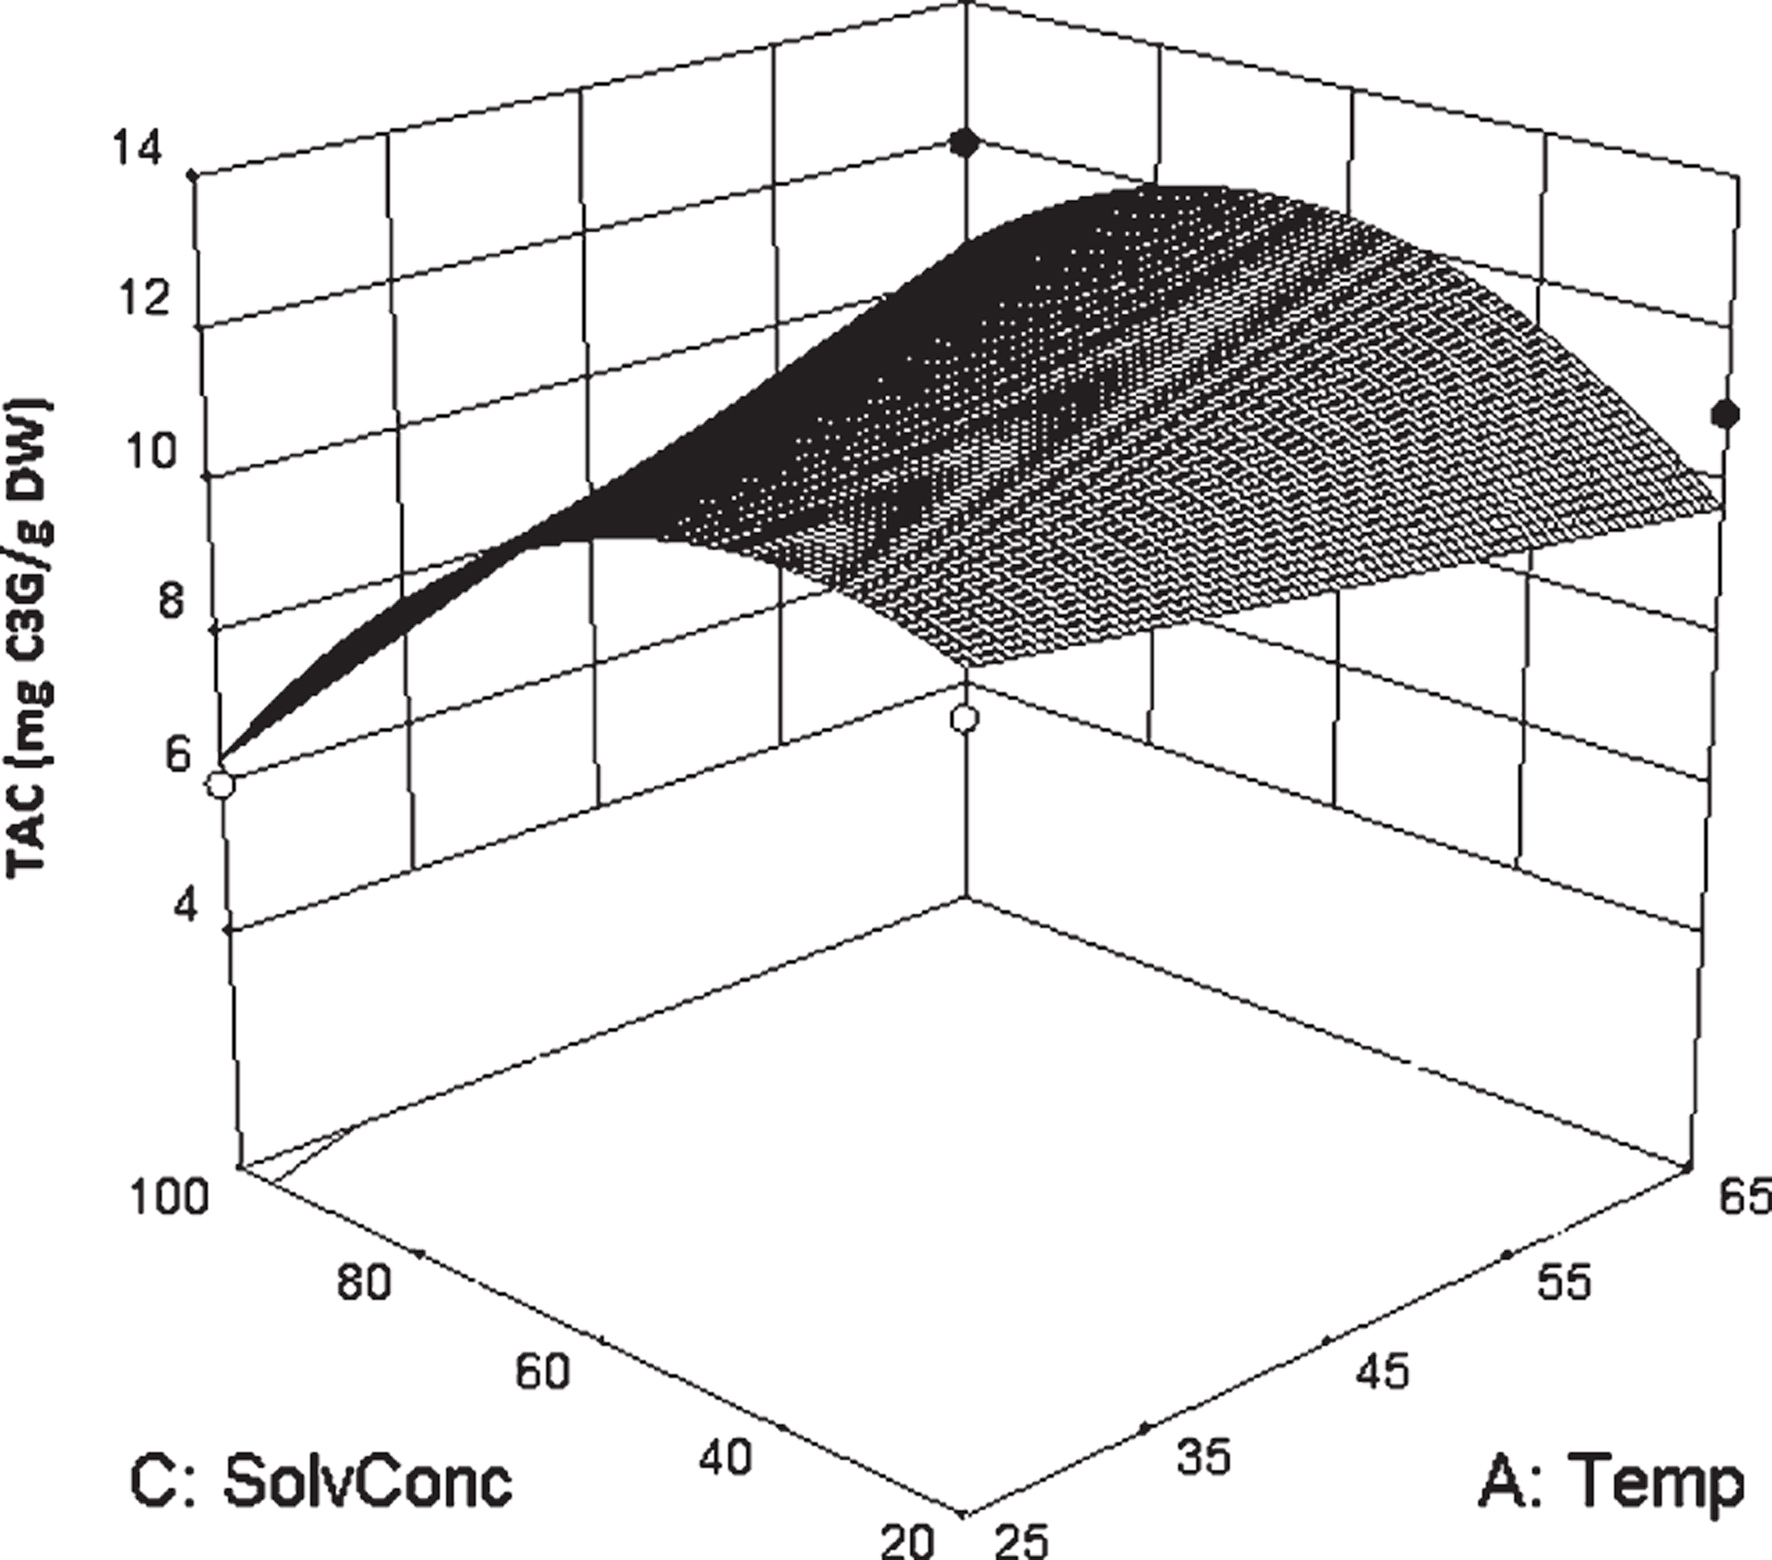 Surface plot of TAC vs. solvent concentration and temperature. In this graphic representation, the other two factors were kept constant at their center point (time 11.5 minutes and solvent to solid ratio of 30 ml/g).